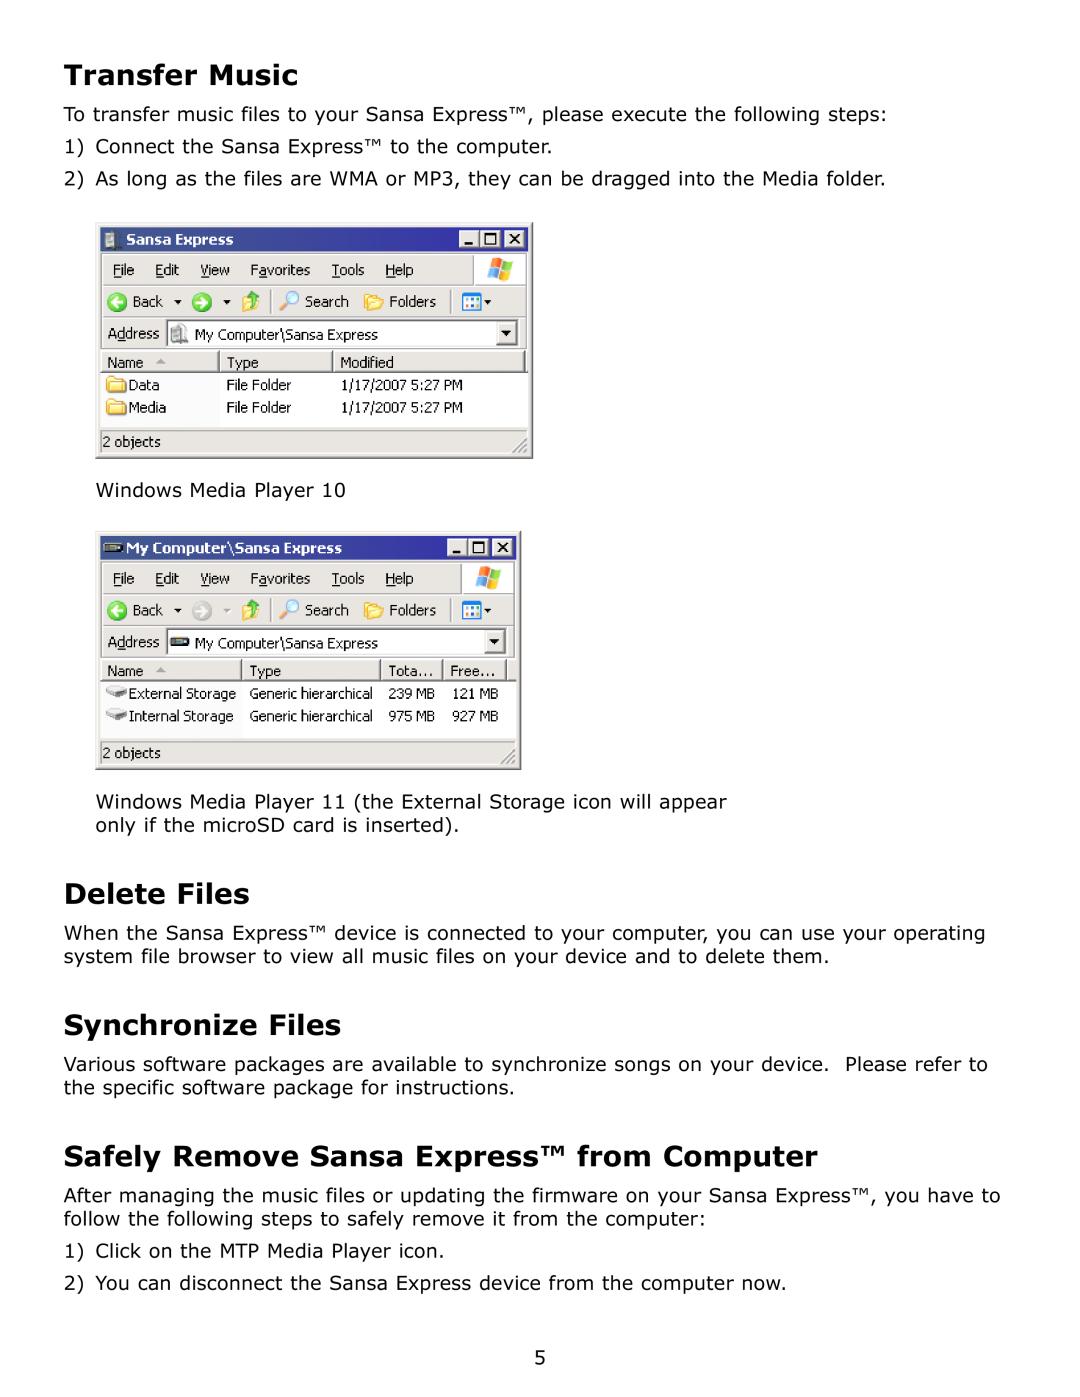 SanDisk c200 user manual Transfer Music, Delete Files, Synchronize Files, Safely Remove Sansa Express from Computer 